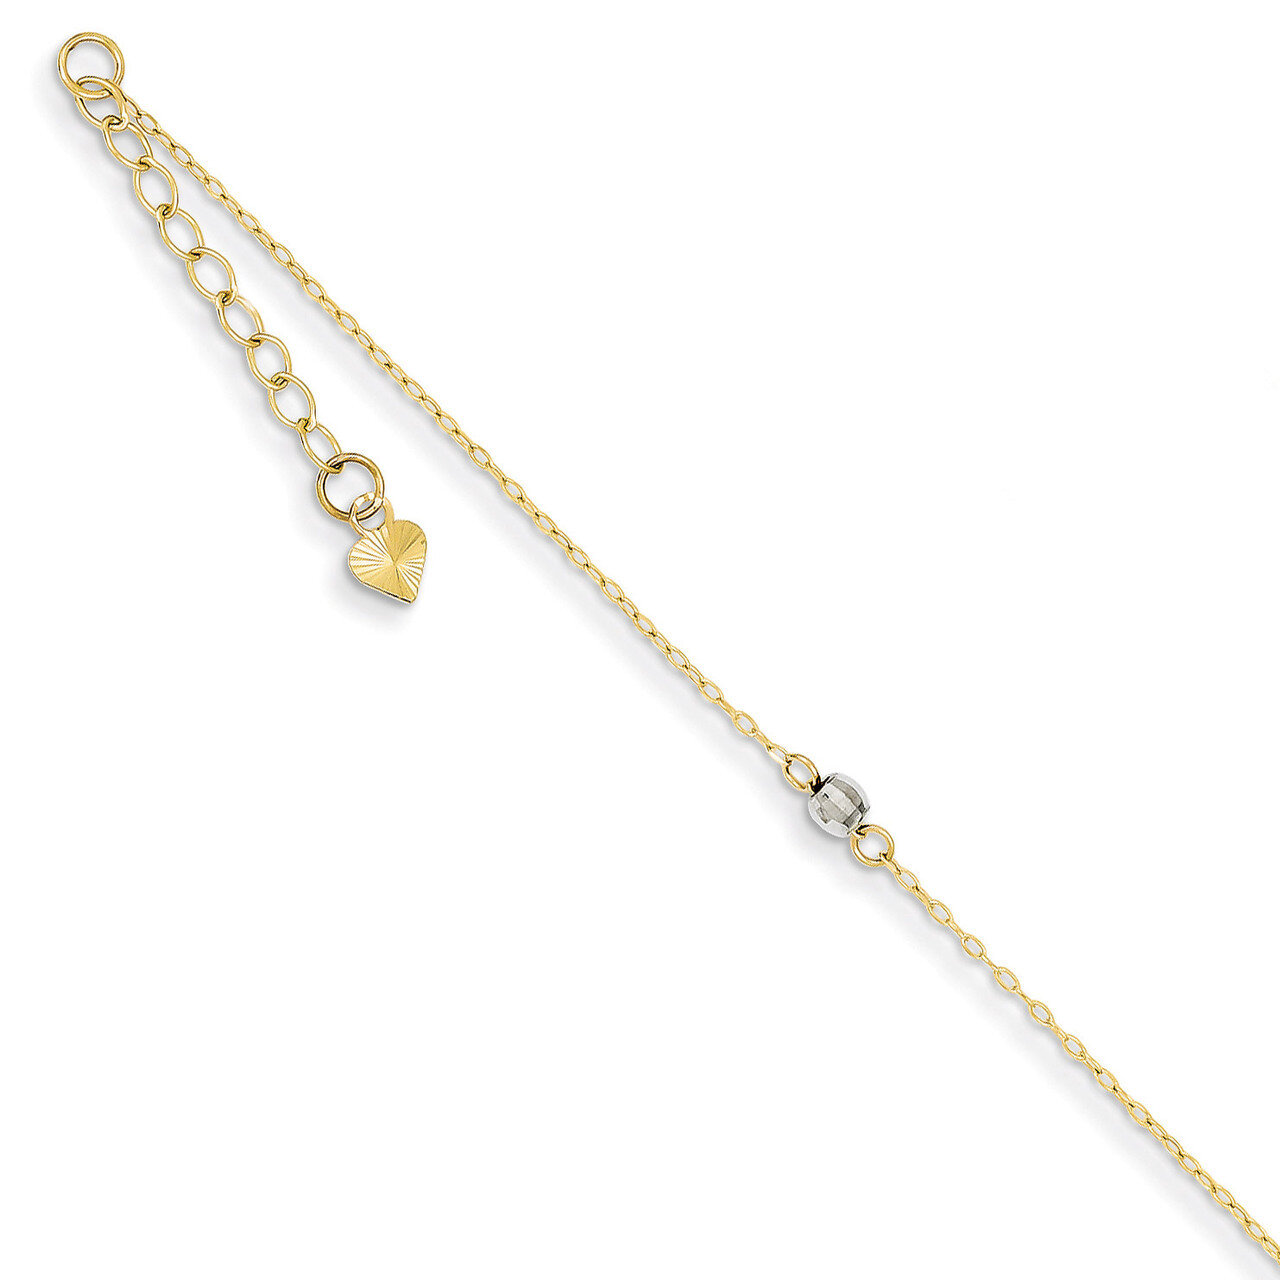 Mirror Bead Anklet 9 Inch 14k Two-Tone Gold ANK185-9